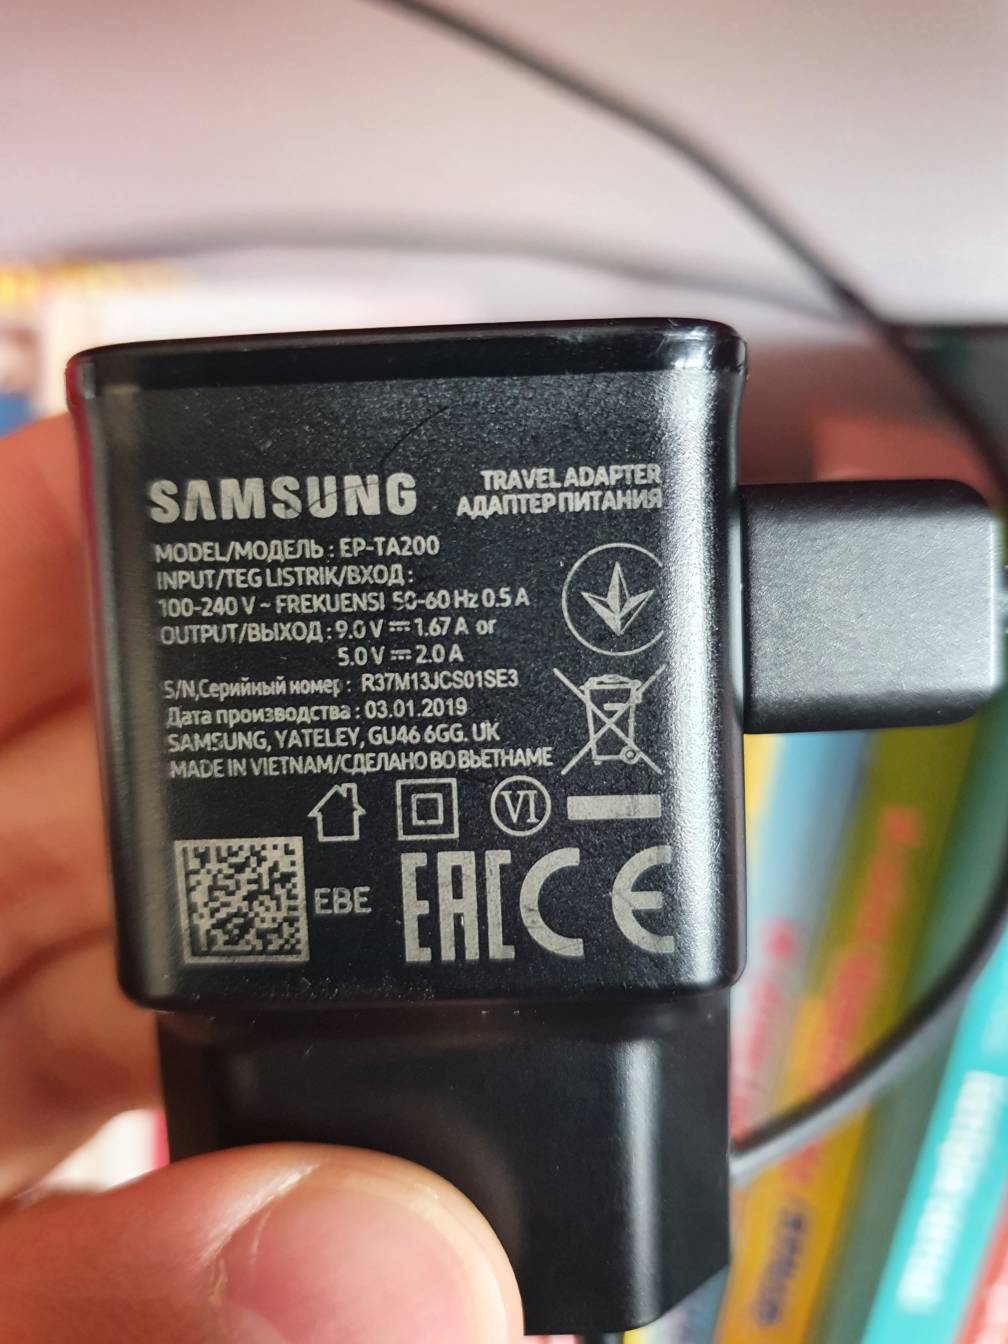 Solved: Samsung s10 - Samsung Members